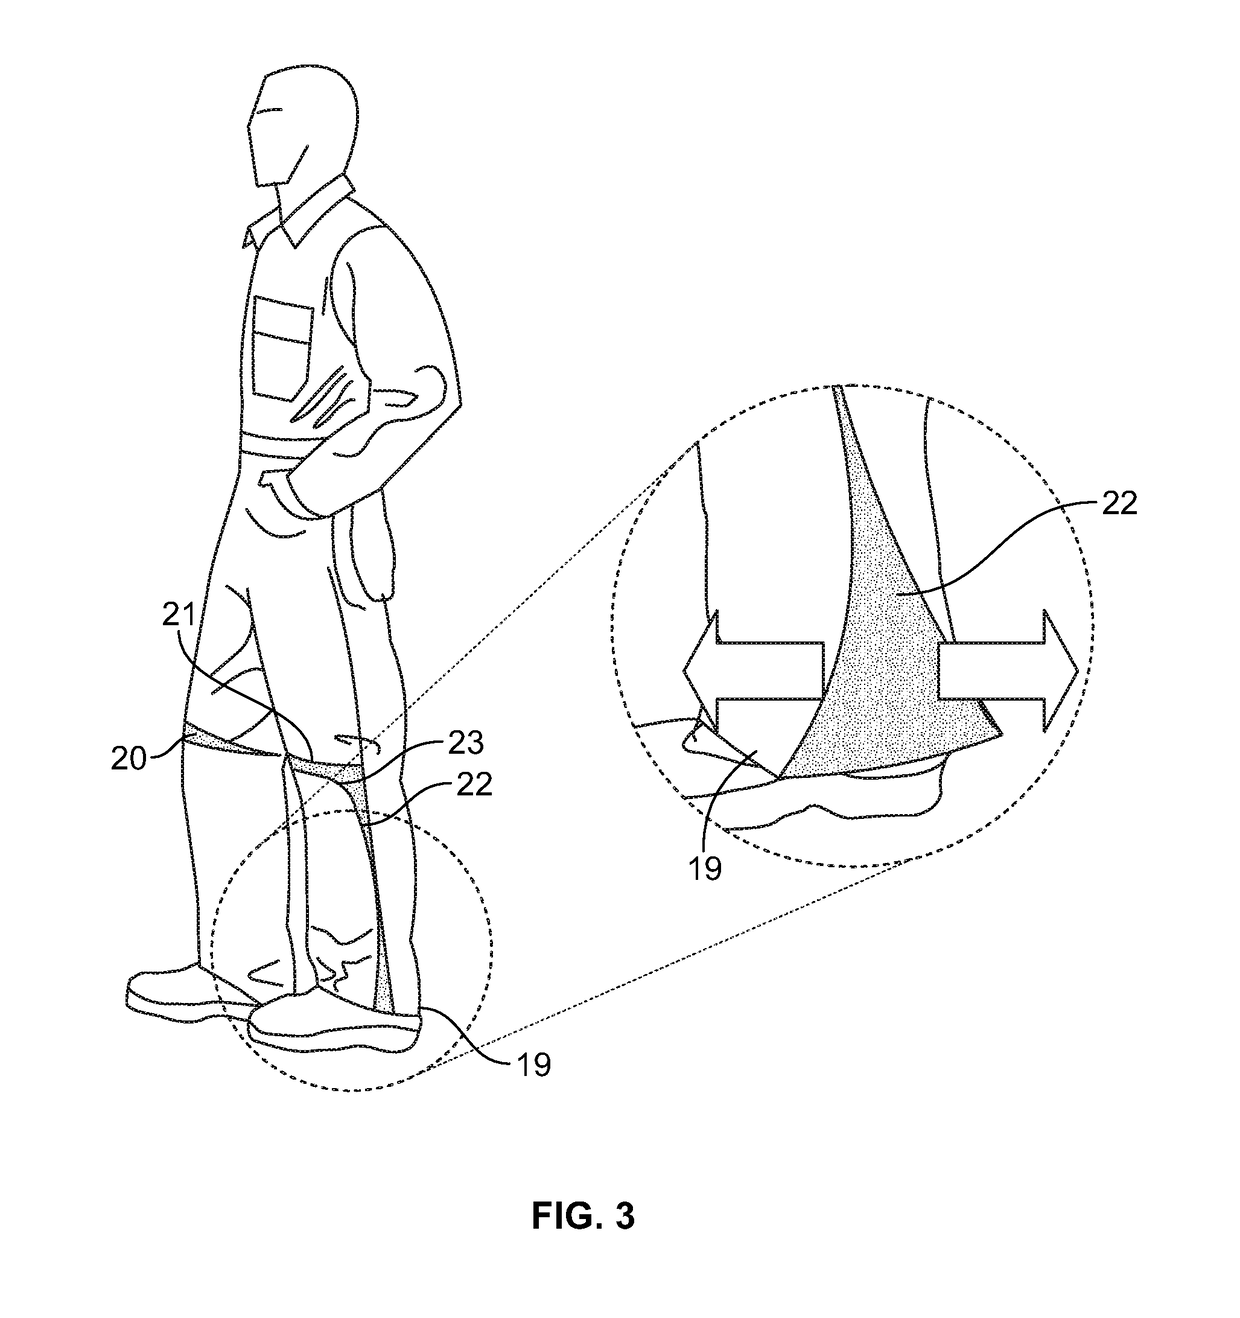 Pants configured for enhancing worker mobility